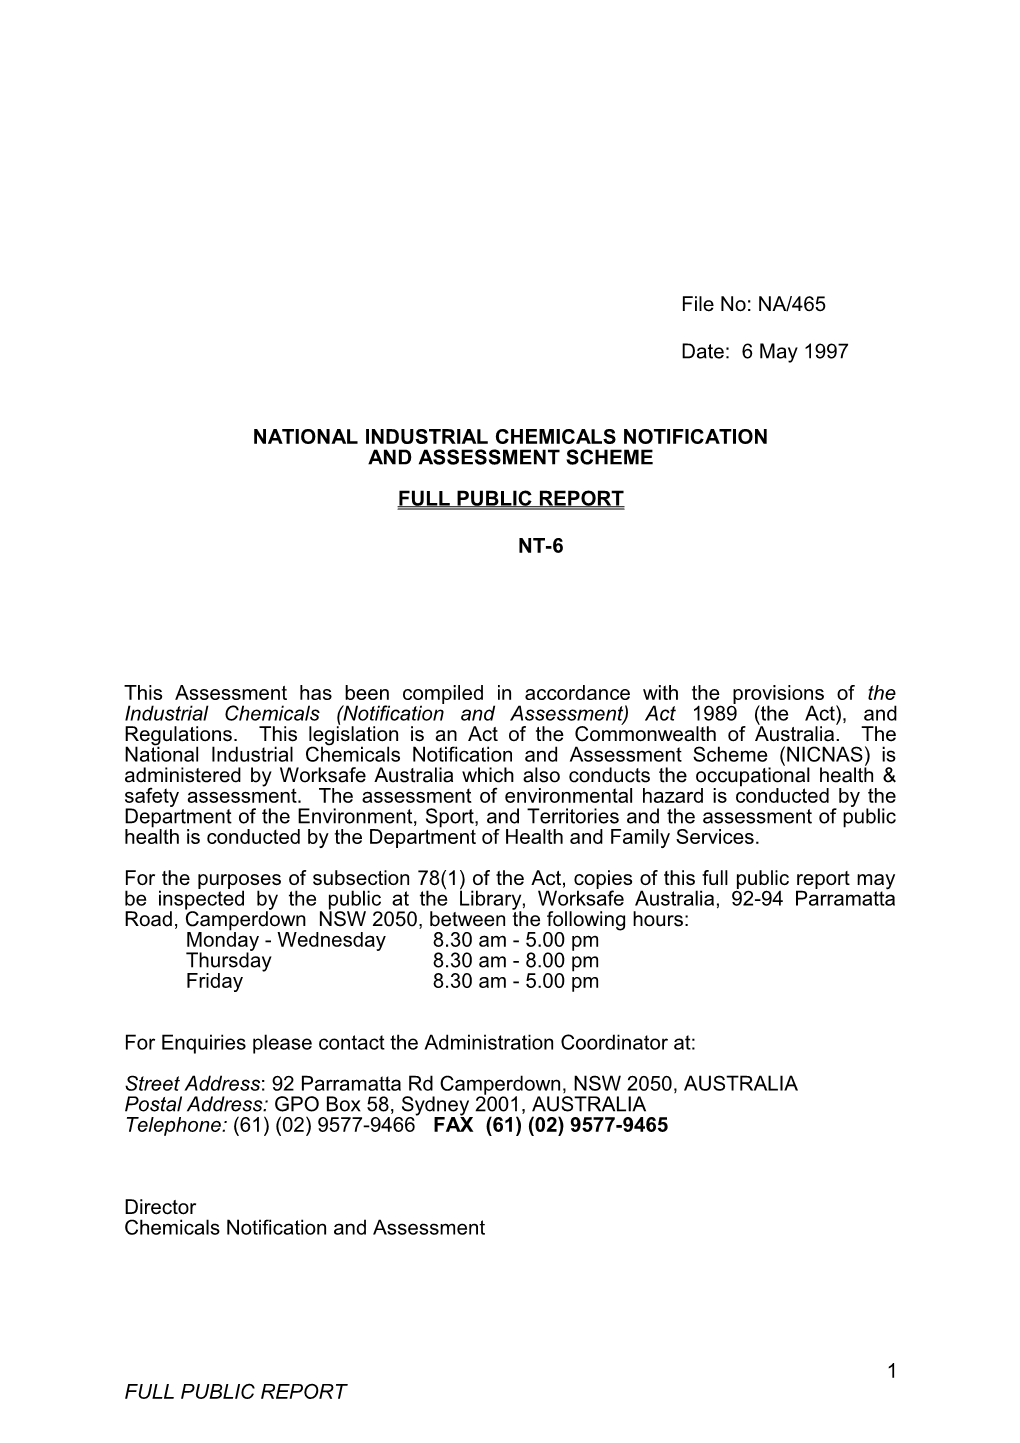 National Industrial Chemicals Notification s10